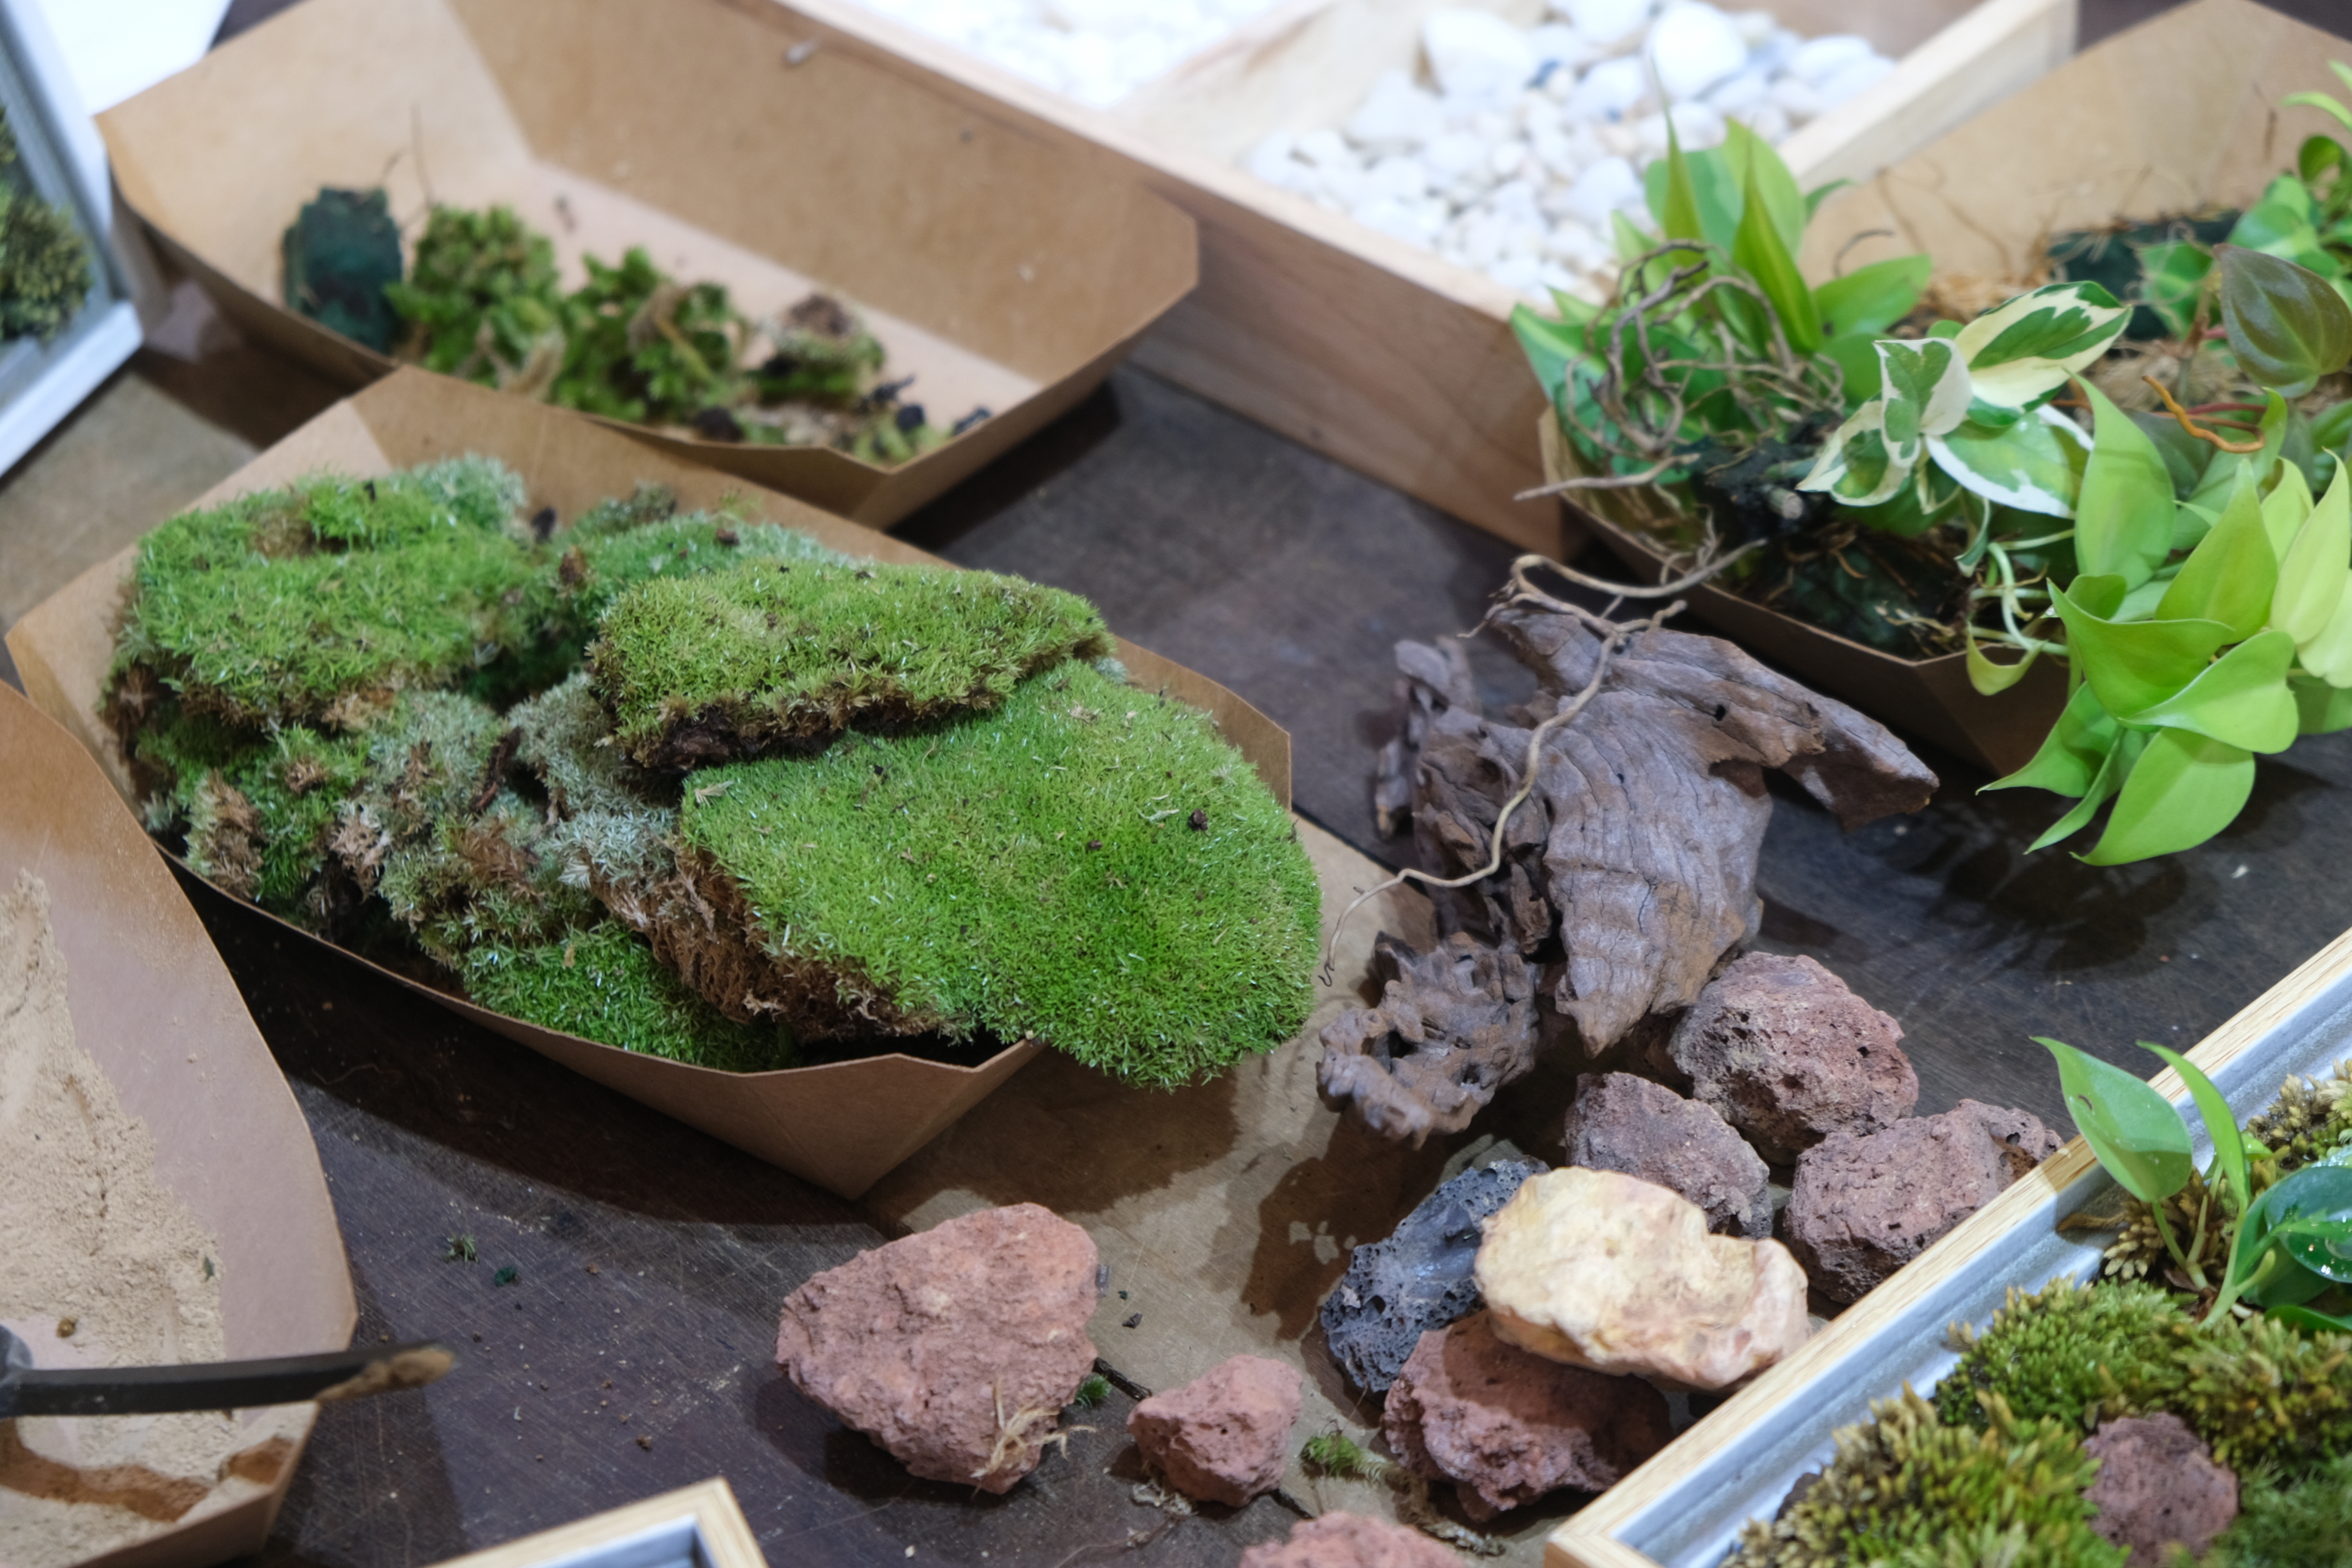 The materials needed to make a moss picture. Photo: Ngoc Phuong / Tuoi Tre News